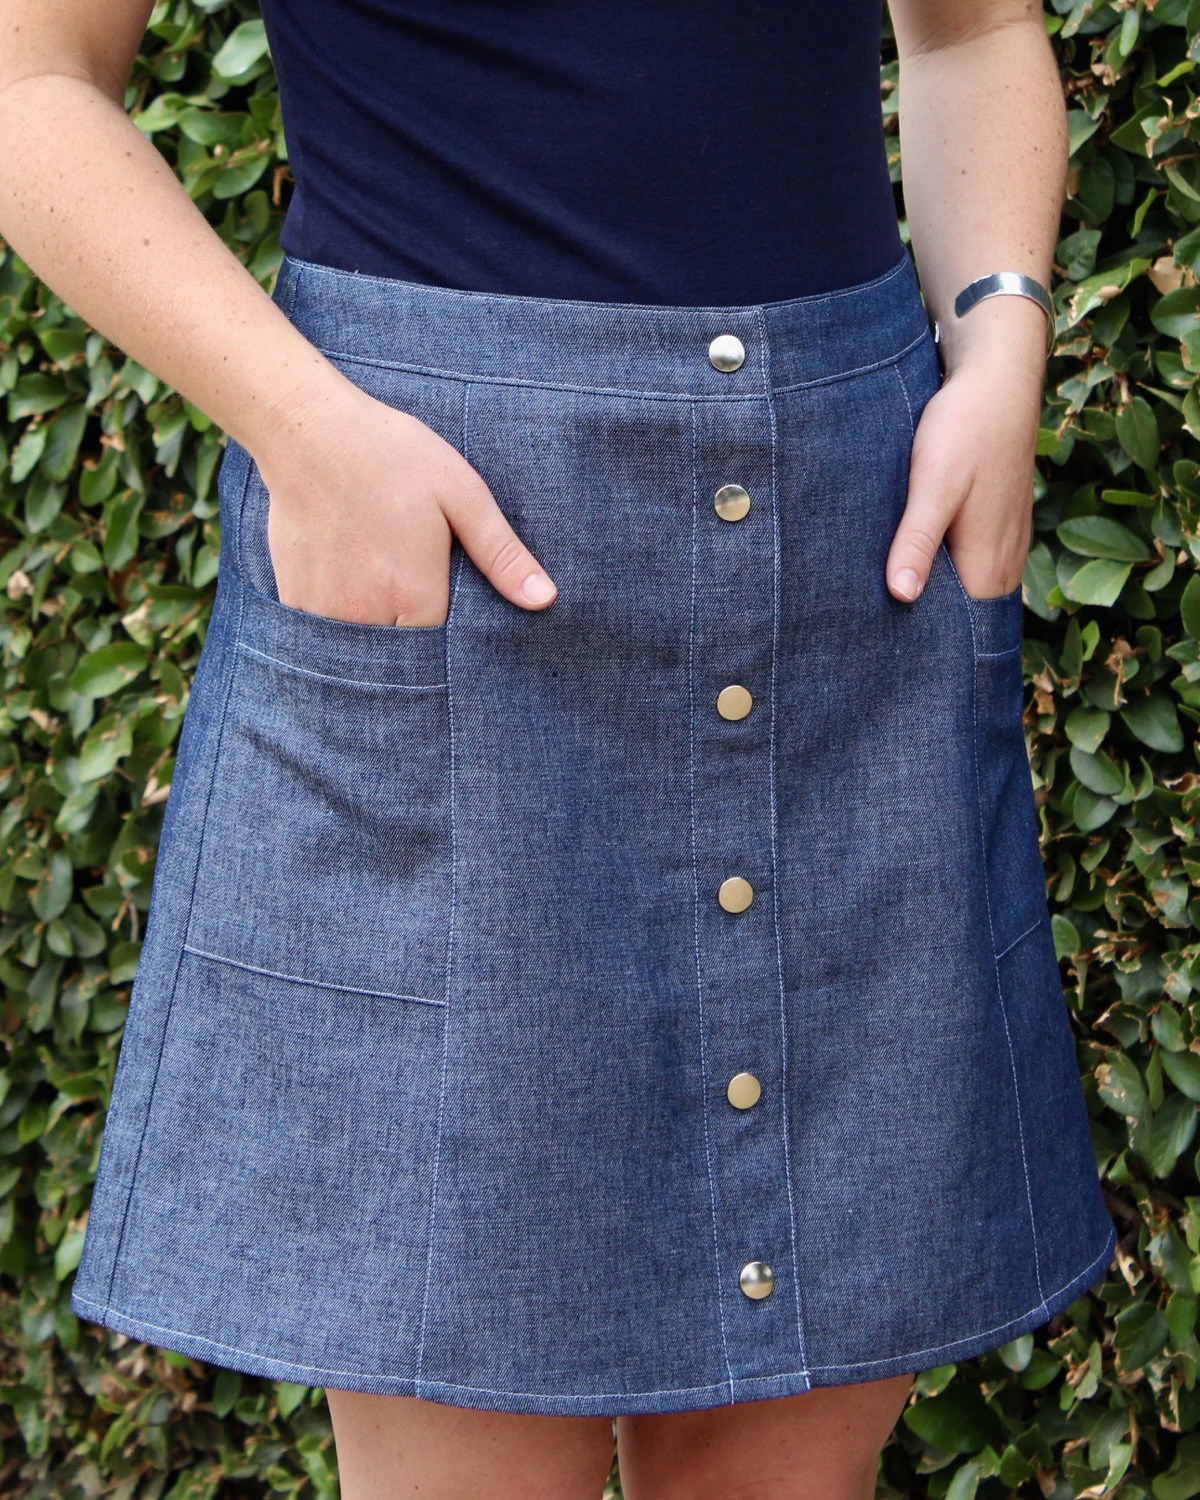 35+ Free Skirt Patterns (How to Make a Skirt) Easy | TREASURIE